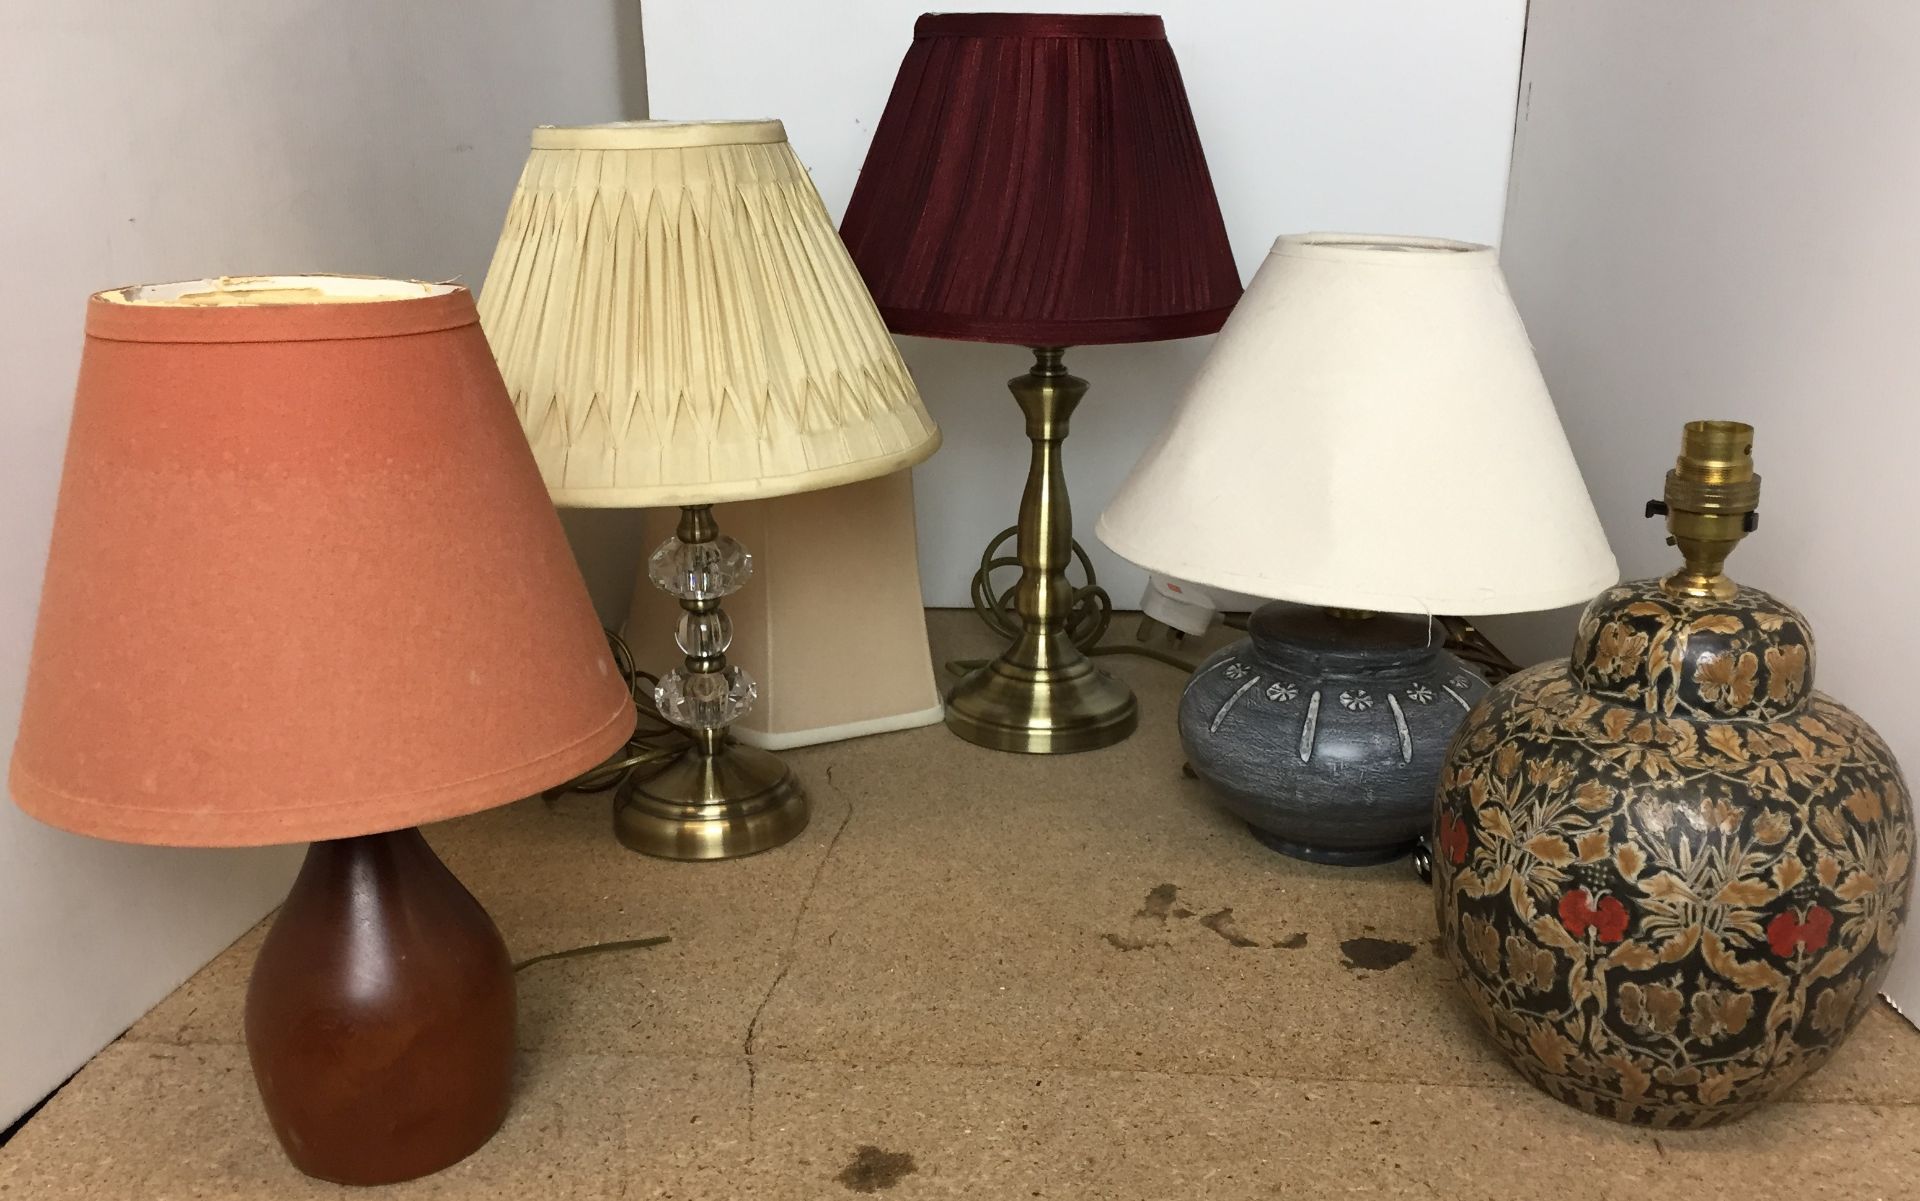 Five table lamps and shades (orange shade damaged) including Imari patterned, brass and glass,